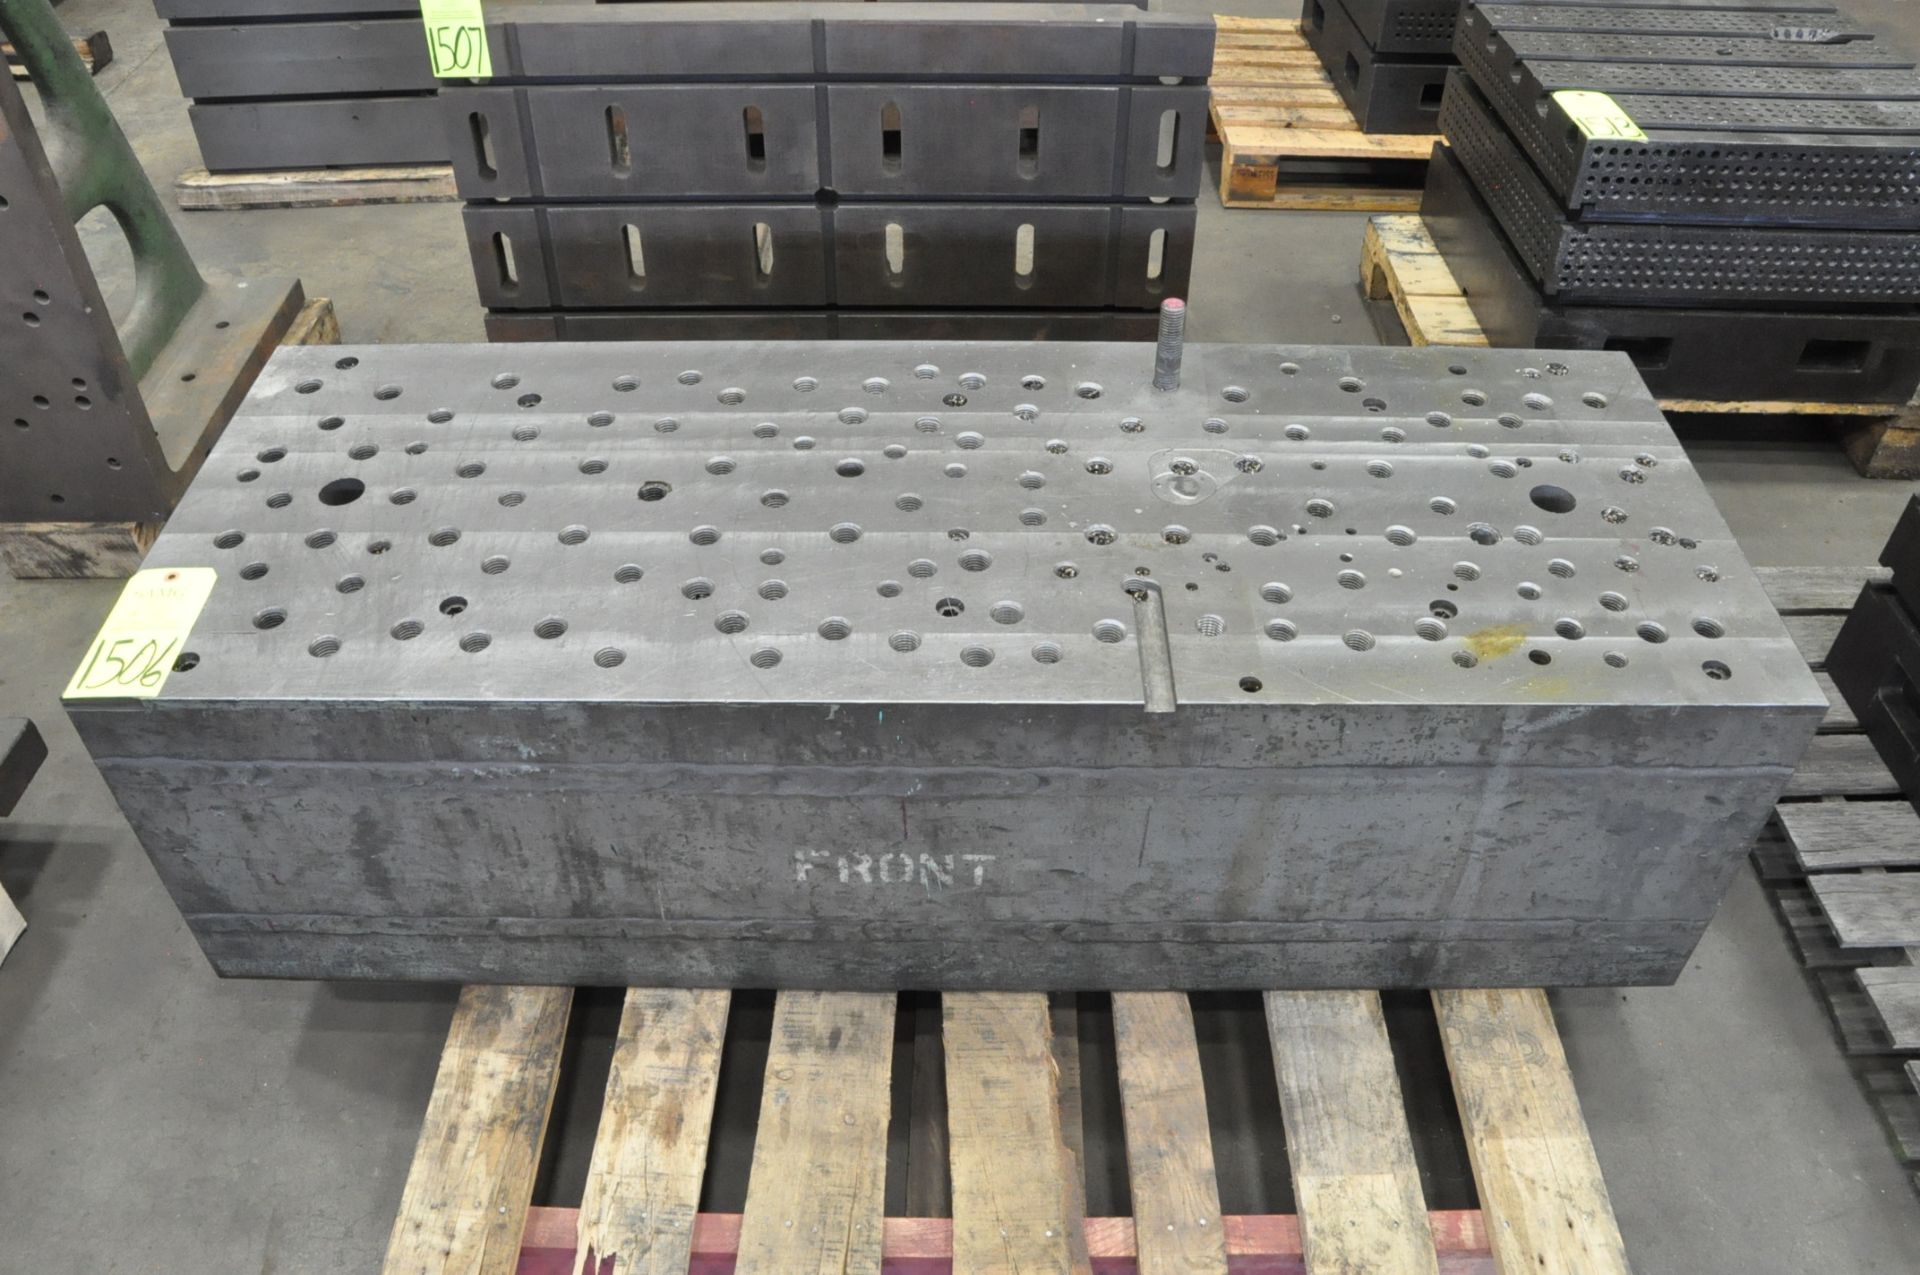 57" x 21" x 15 1/2" Drilled and Tapped Box Table on (1) Pallet, (F-19), (Yellow Tag)